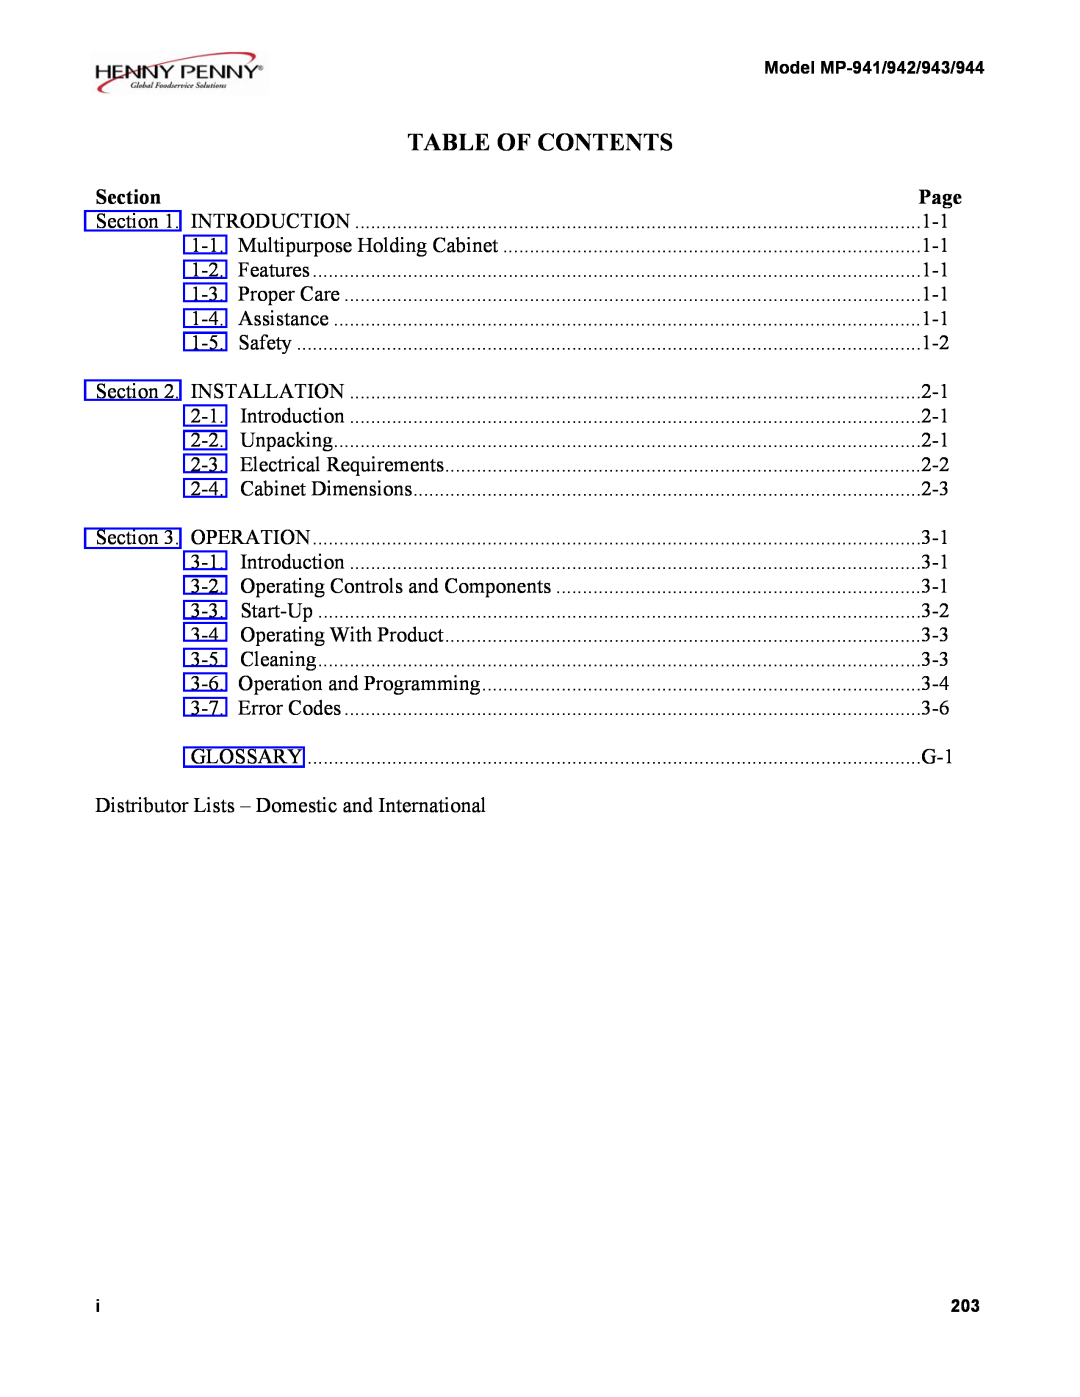 Henny Penny MP-942, MP-944, MP-943, MP-941 manual Table Of Contents, Section, Page 